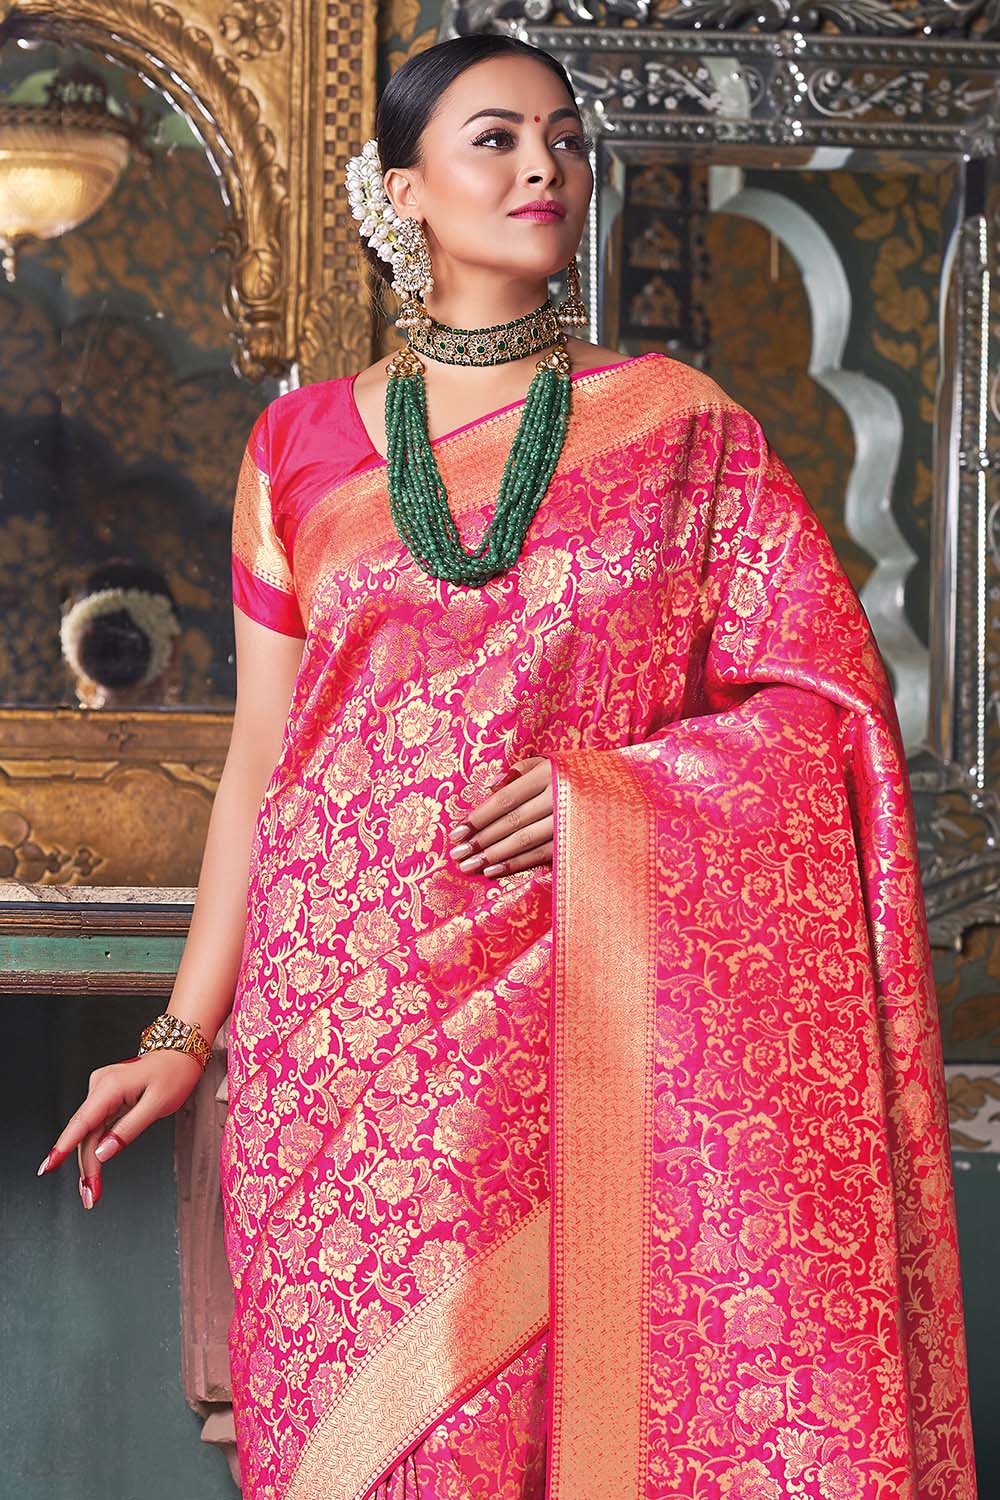 What are the ornaments that look great with banarasi sarees? - Quora